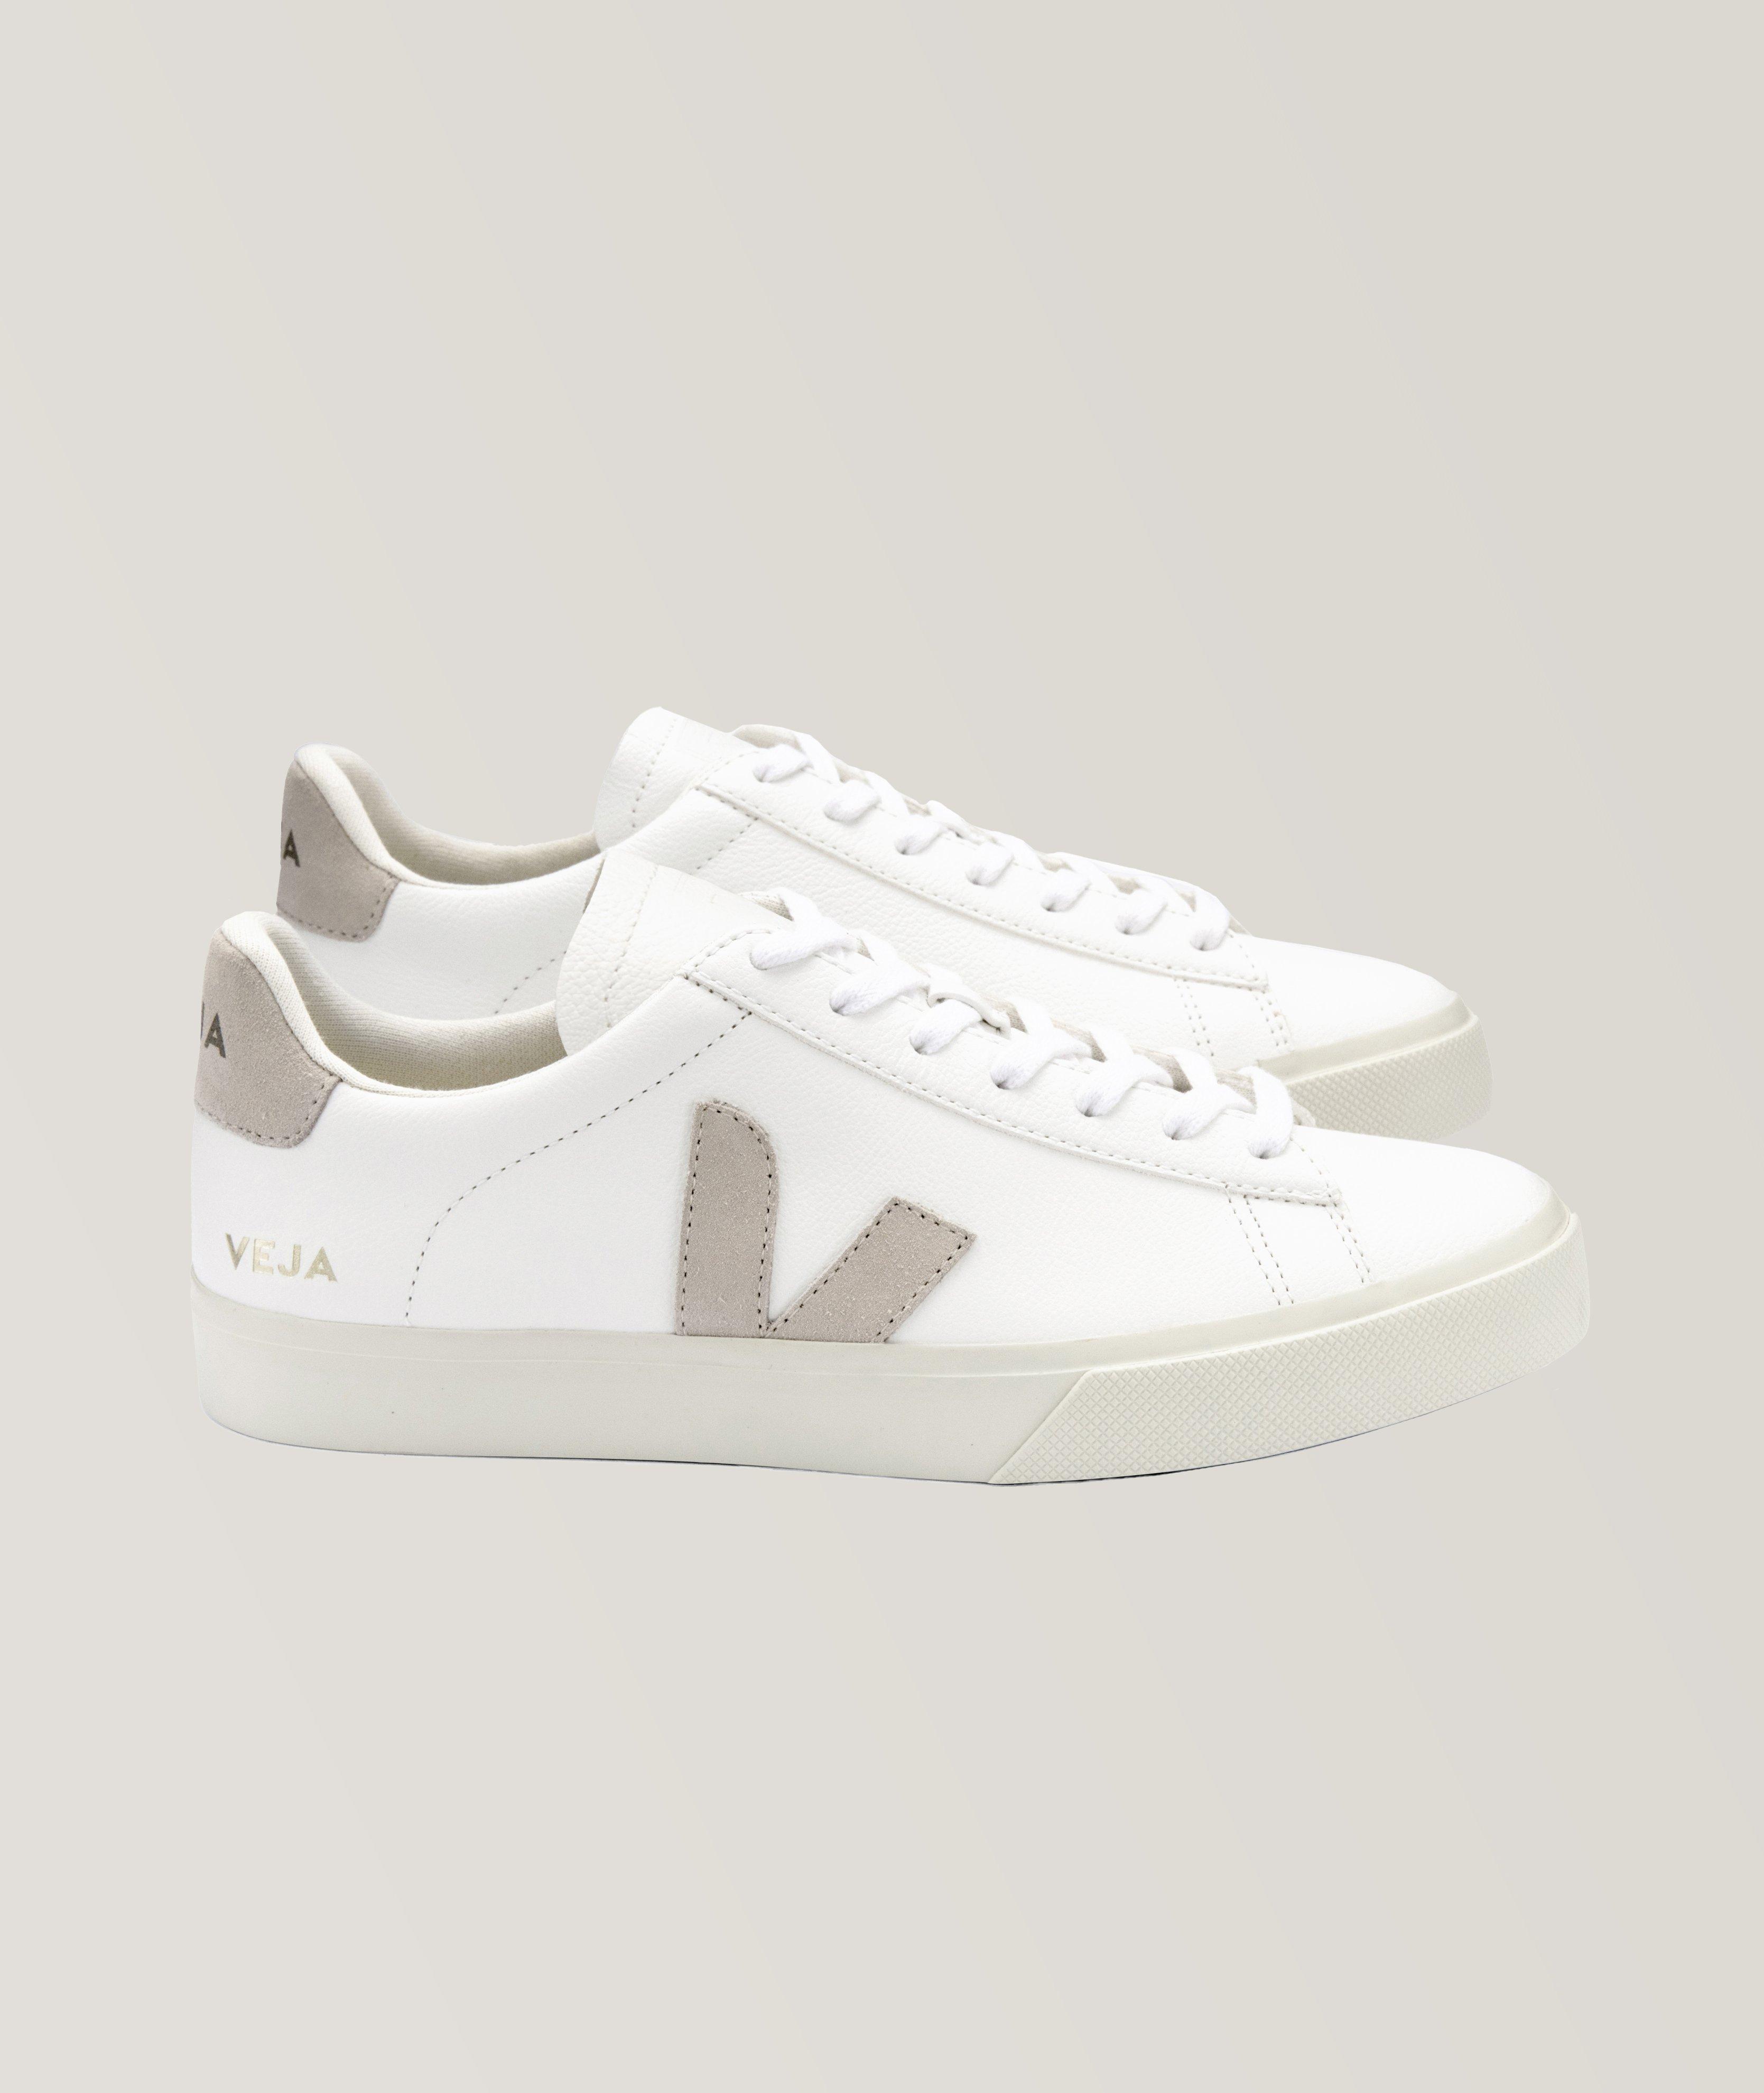 Campo Chrome-free Leather Lace-up Sneakers image 0